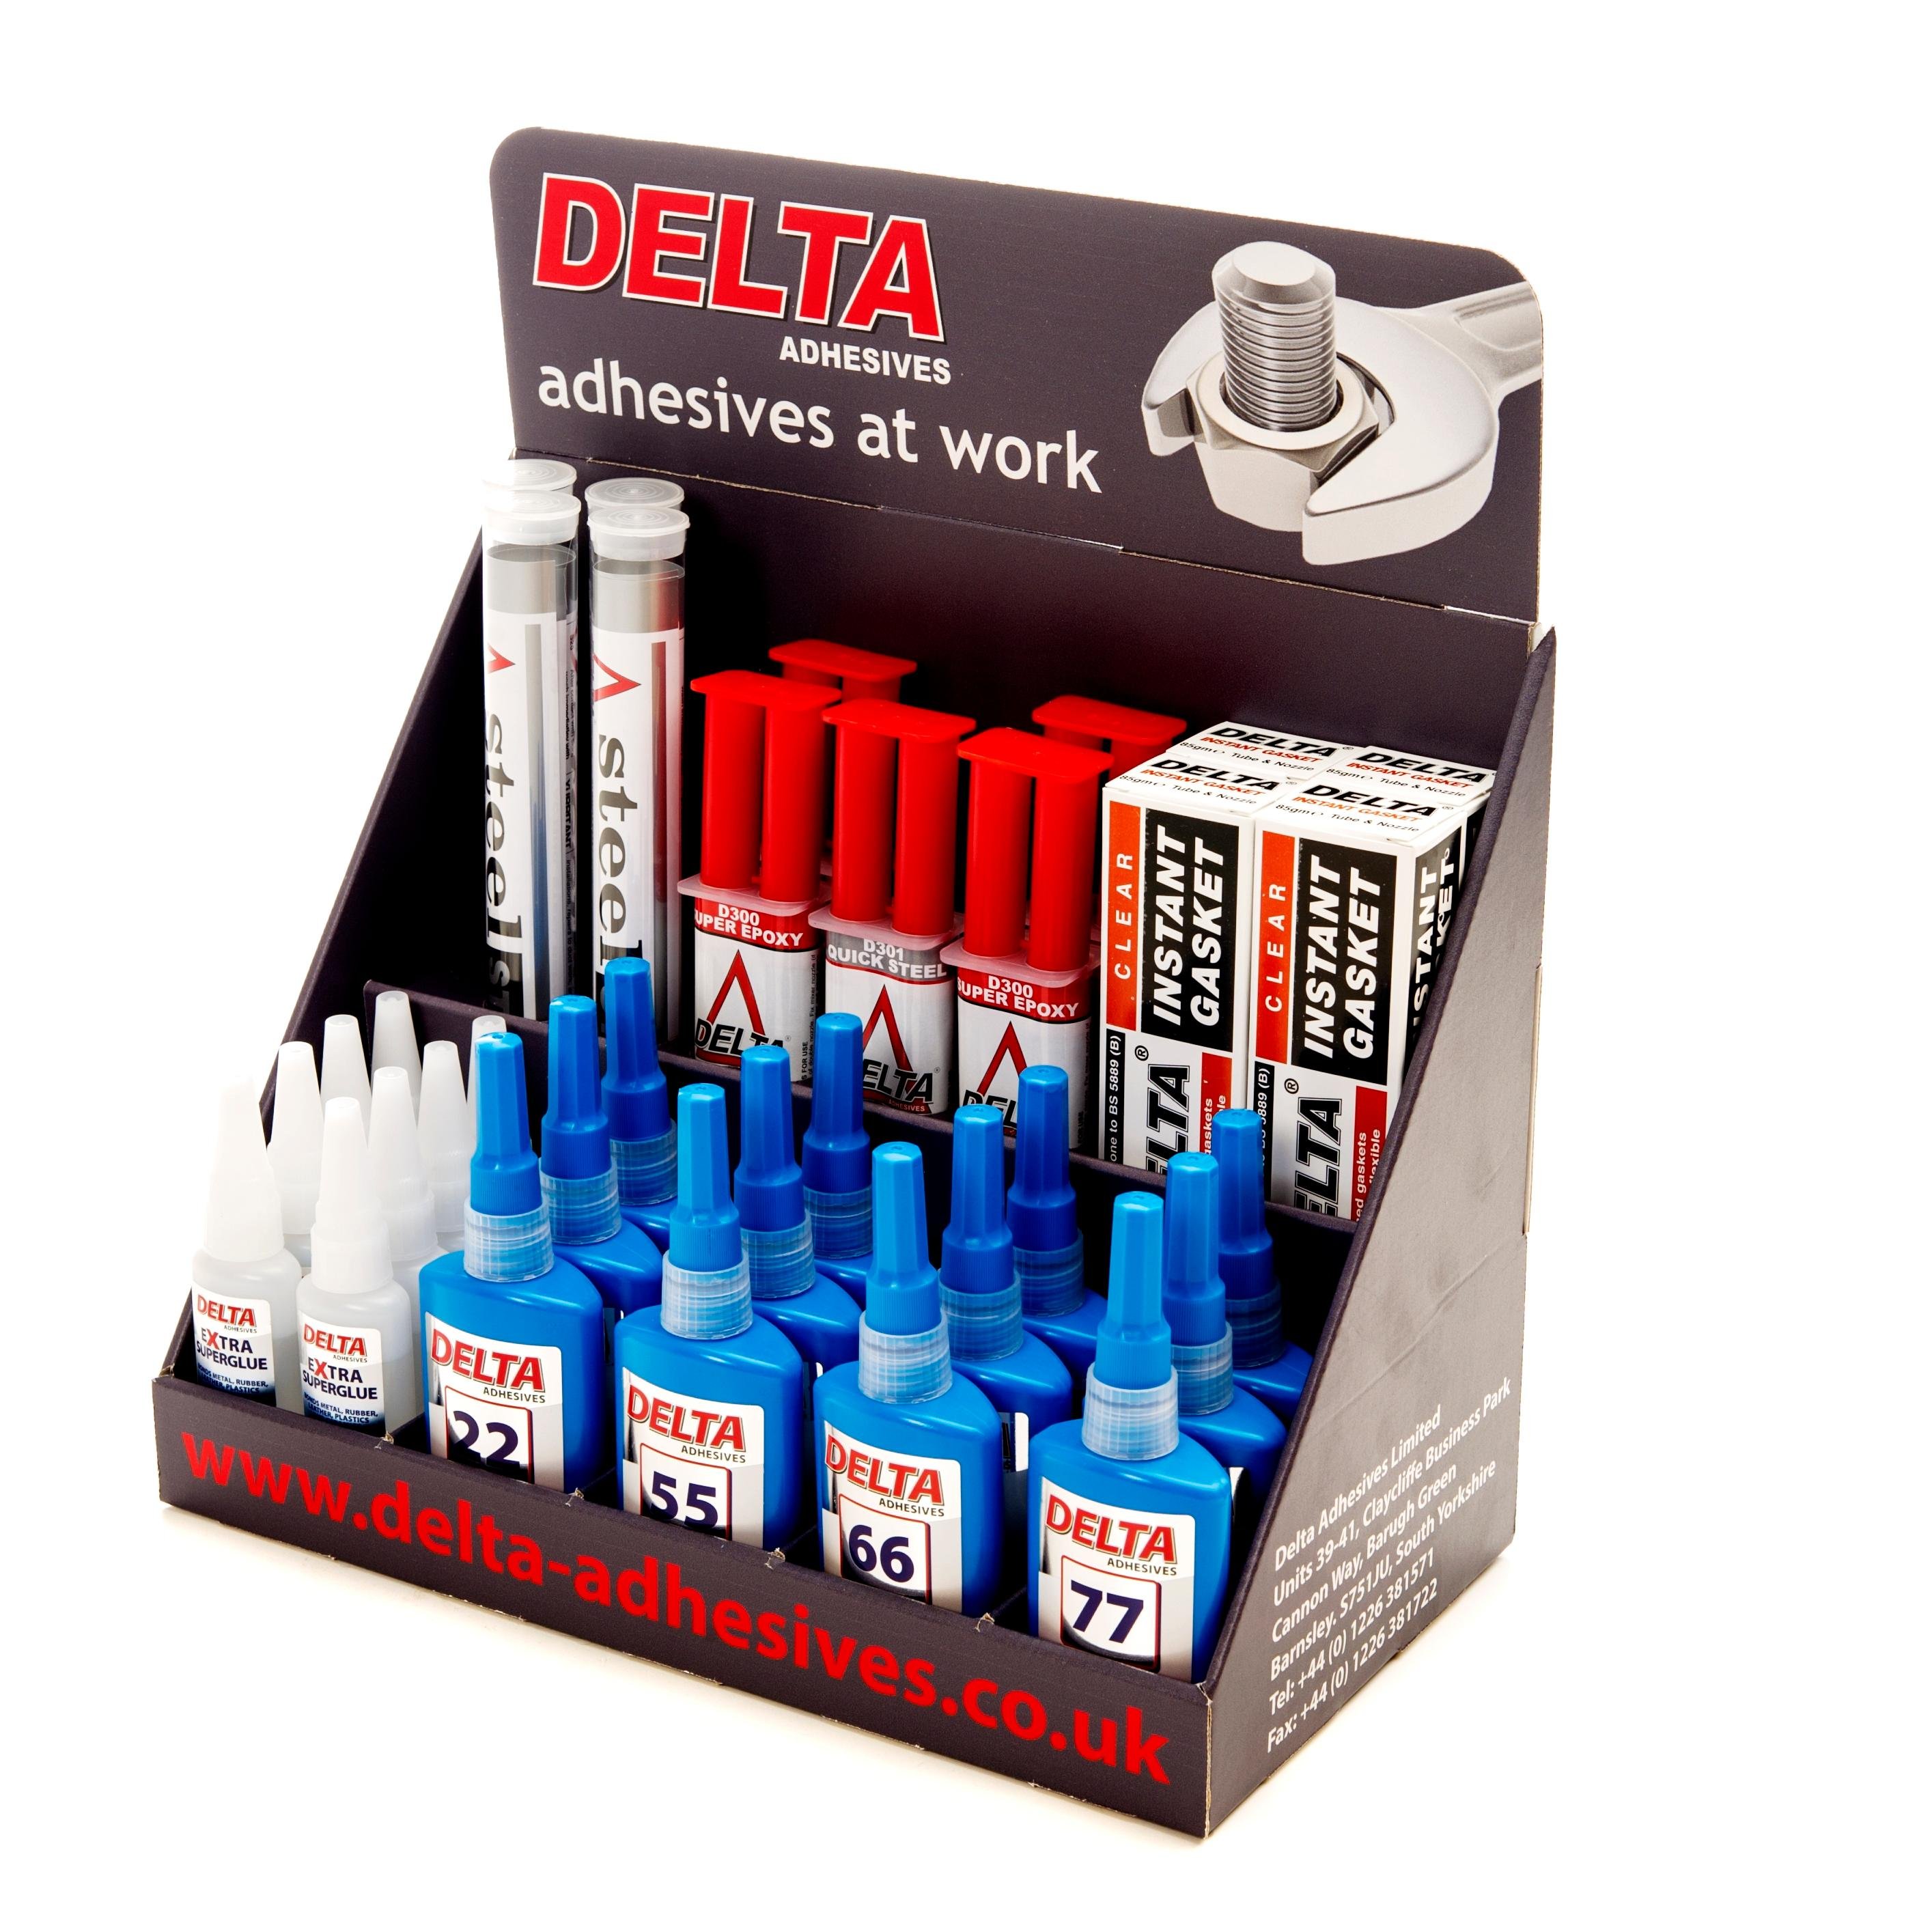 Delta Adhesives, state of the art manufacturers & formulators of engineering adhesives & sealants. Working with distributors throughout the UK & Europe.